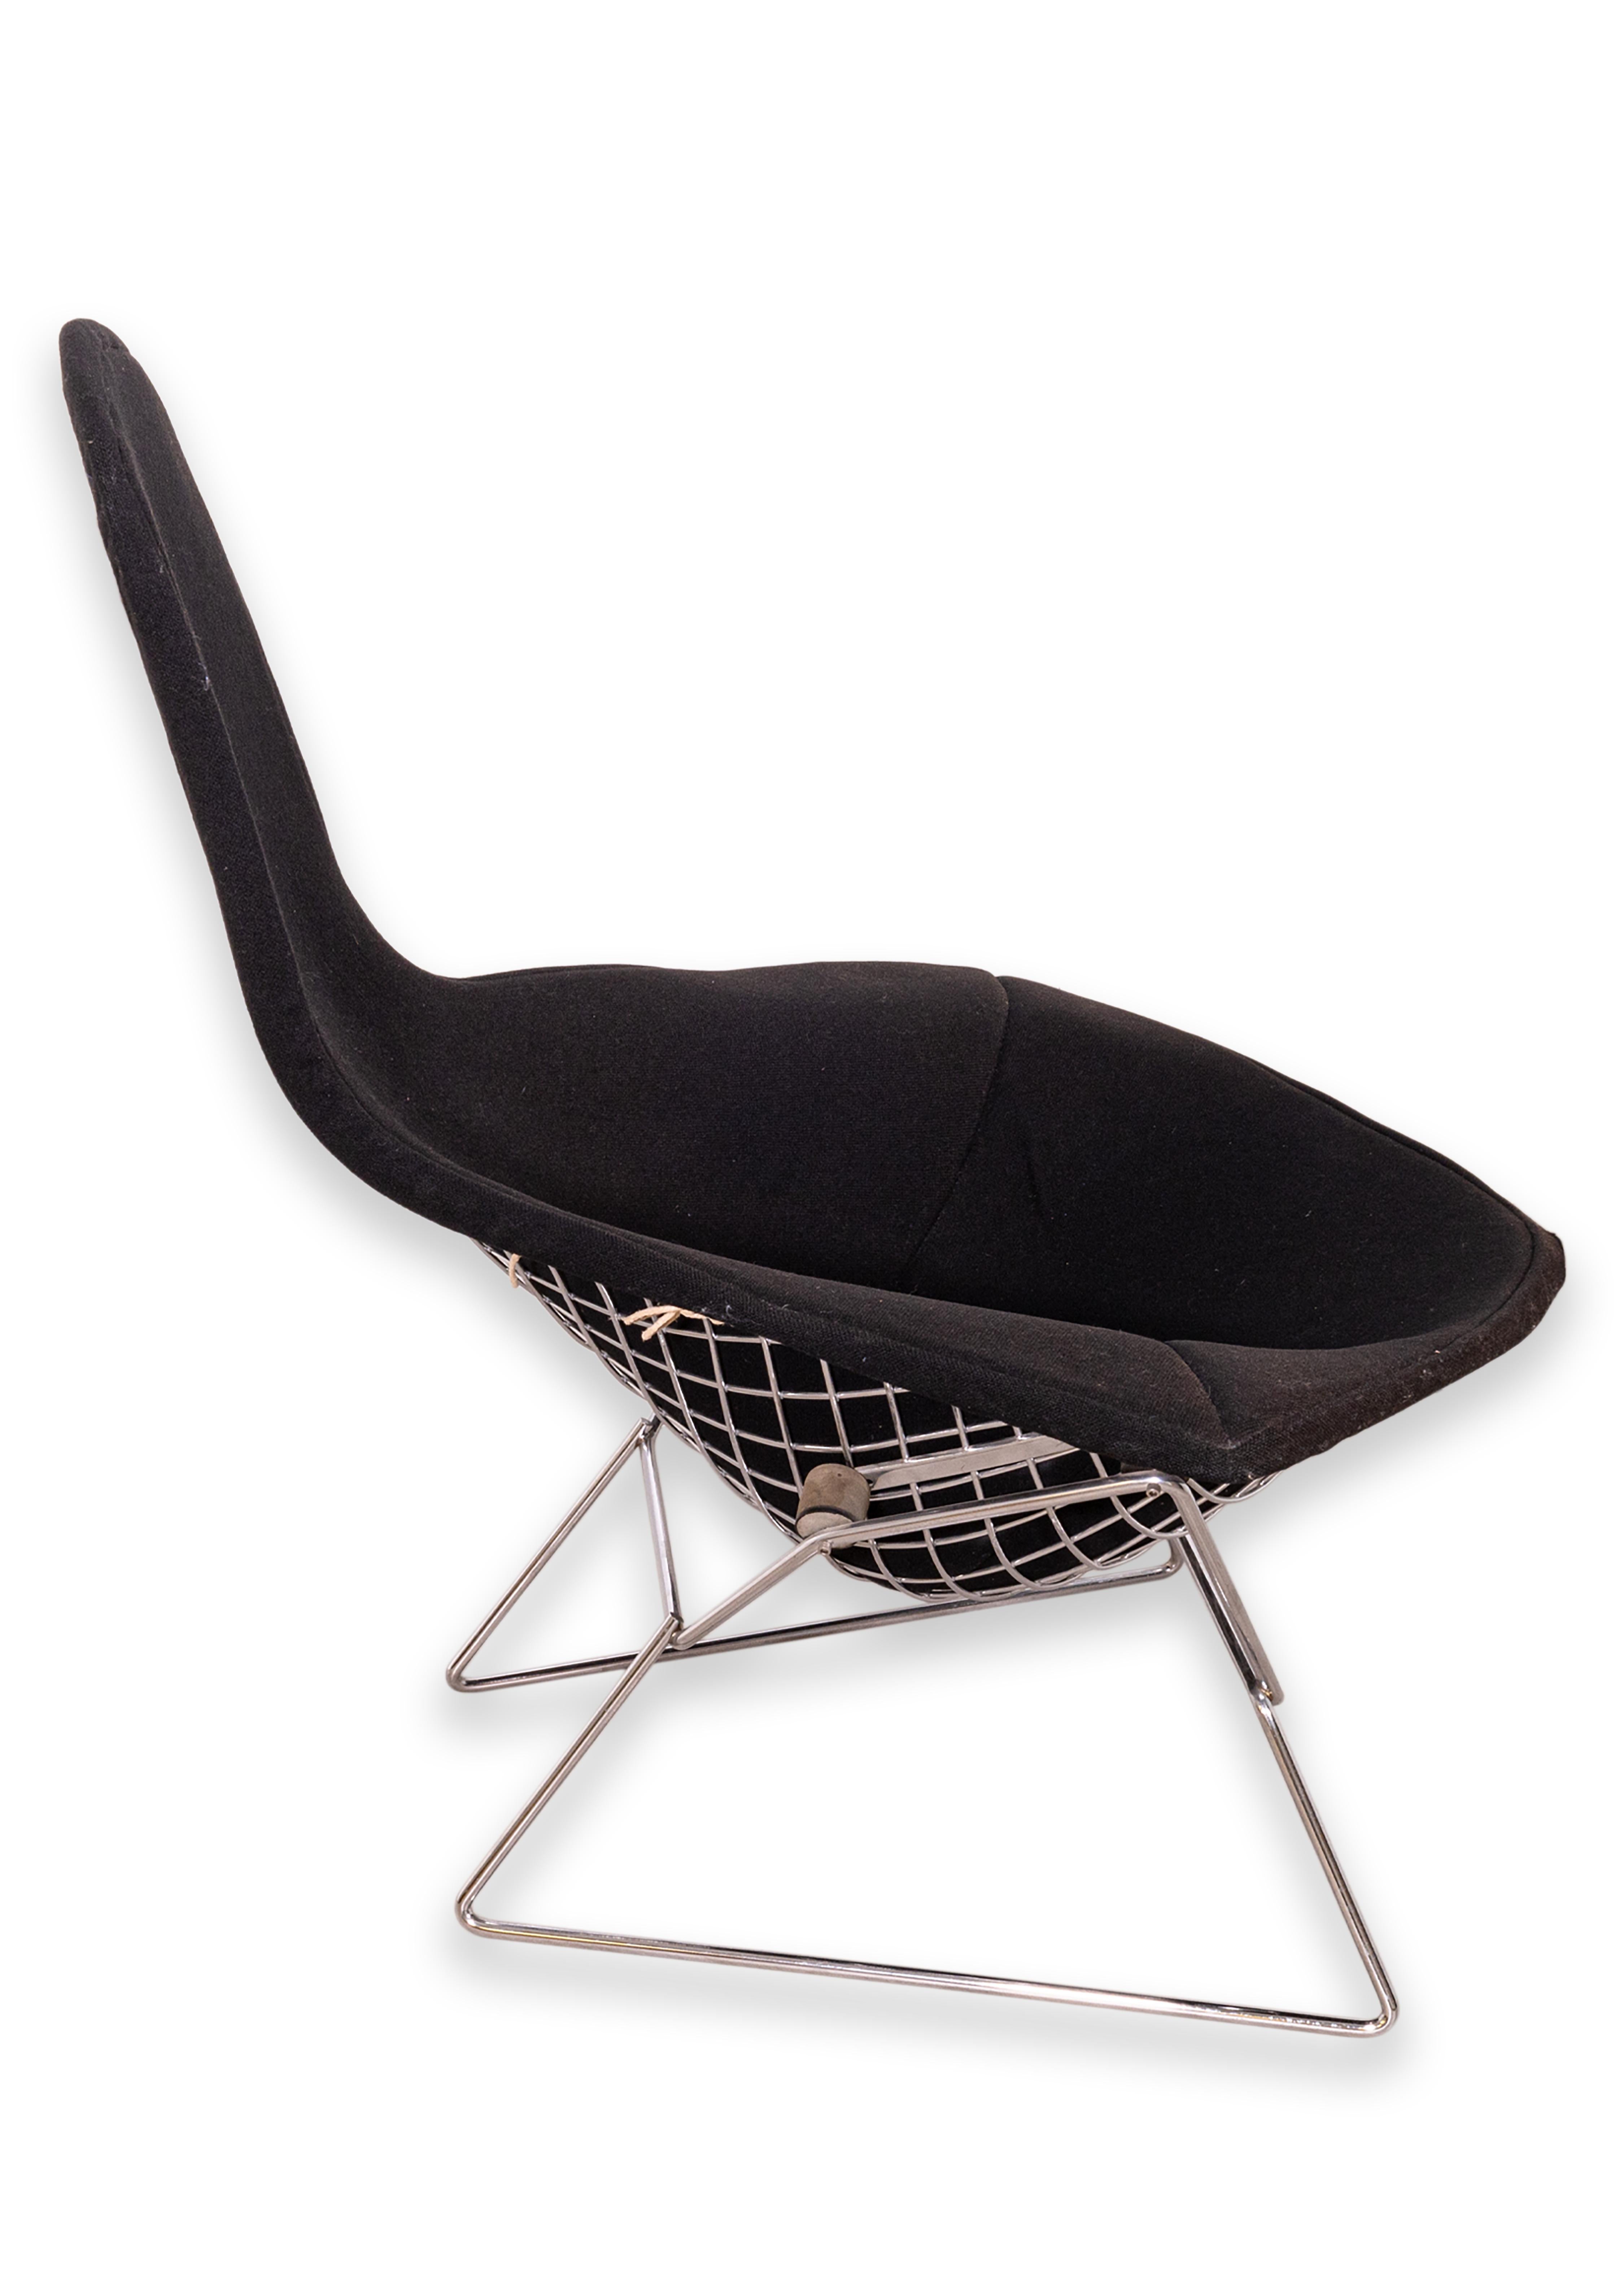 American Harry Bertoia for Knoll Bird Chair & Ottoman with Black Upholstery Original 60s For Sale